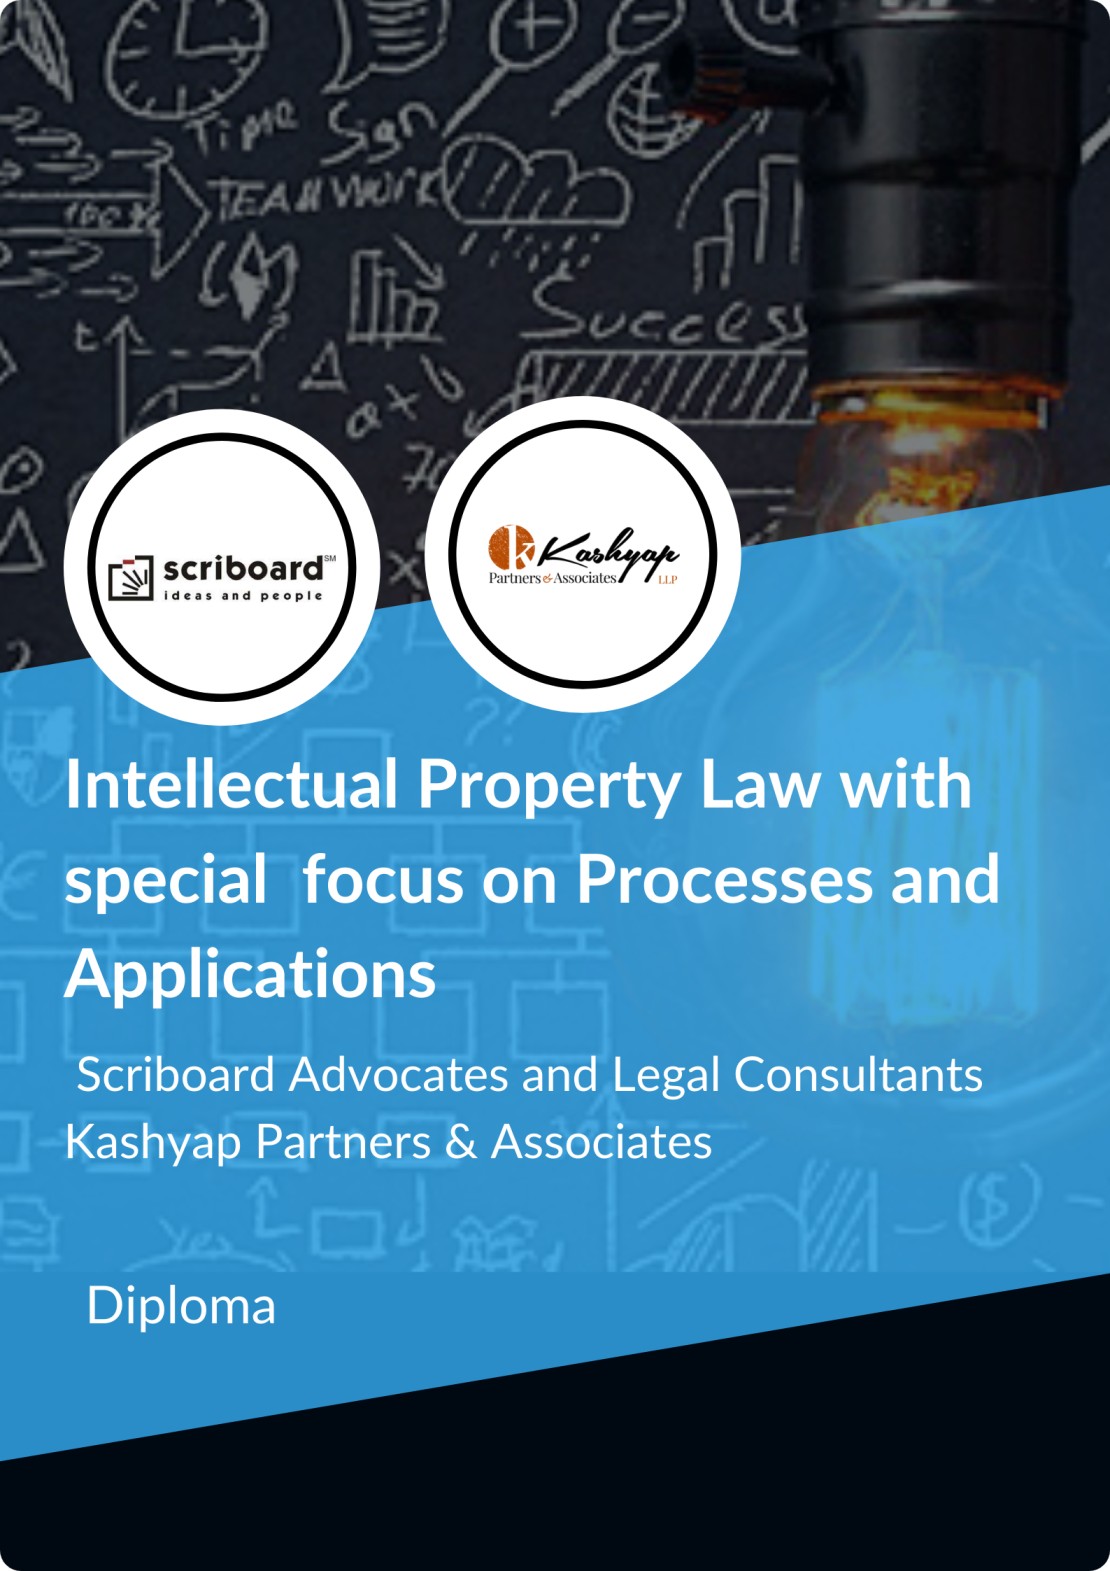 Diploma in Intellectual Property Law with Special Focus on Processes